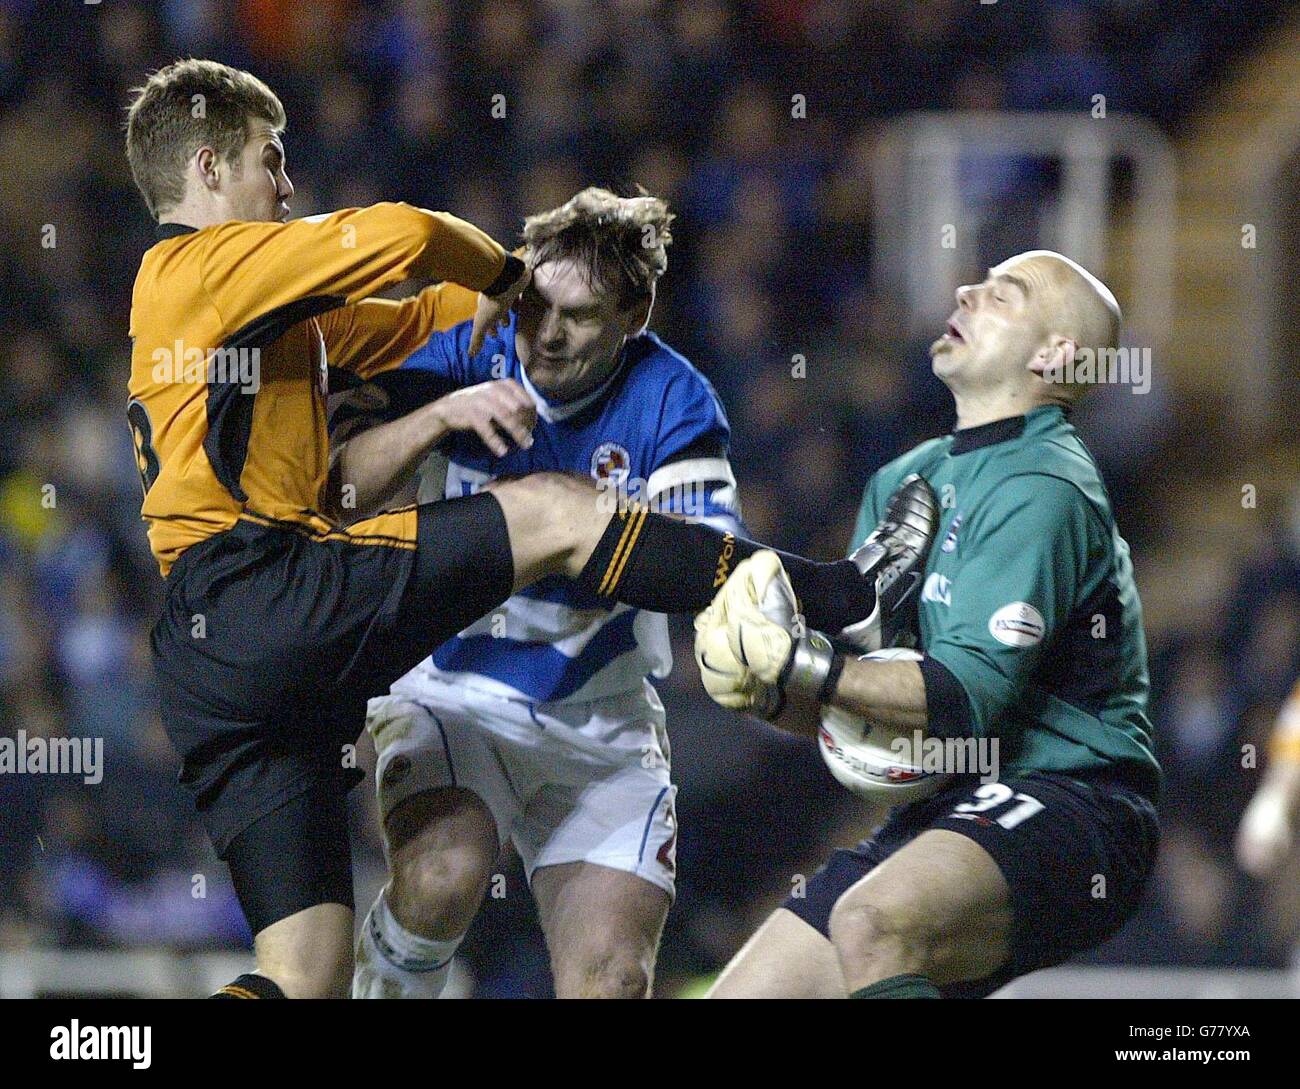 Wolverhampton Wanderers' striker Kenny Miller rises a foot to challenged for the ball as Reading keeper Marcus Hahnemann trys to collect, with defender Steve Brown in close contention, during their Nationwide Division One match at The Madejski Stadium. . Stock Photo